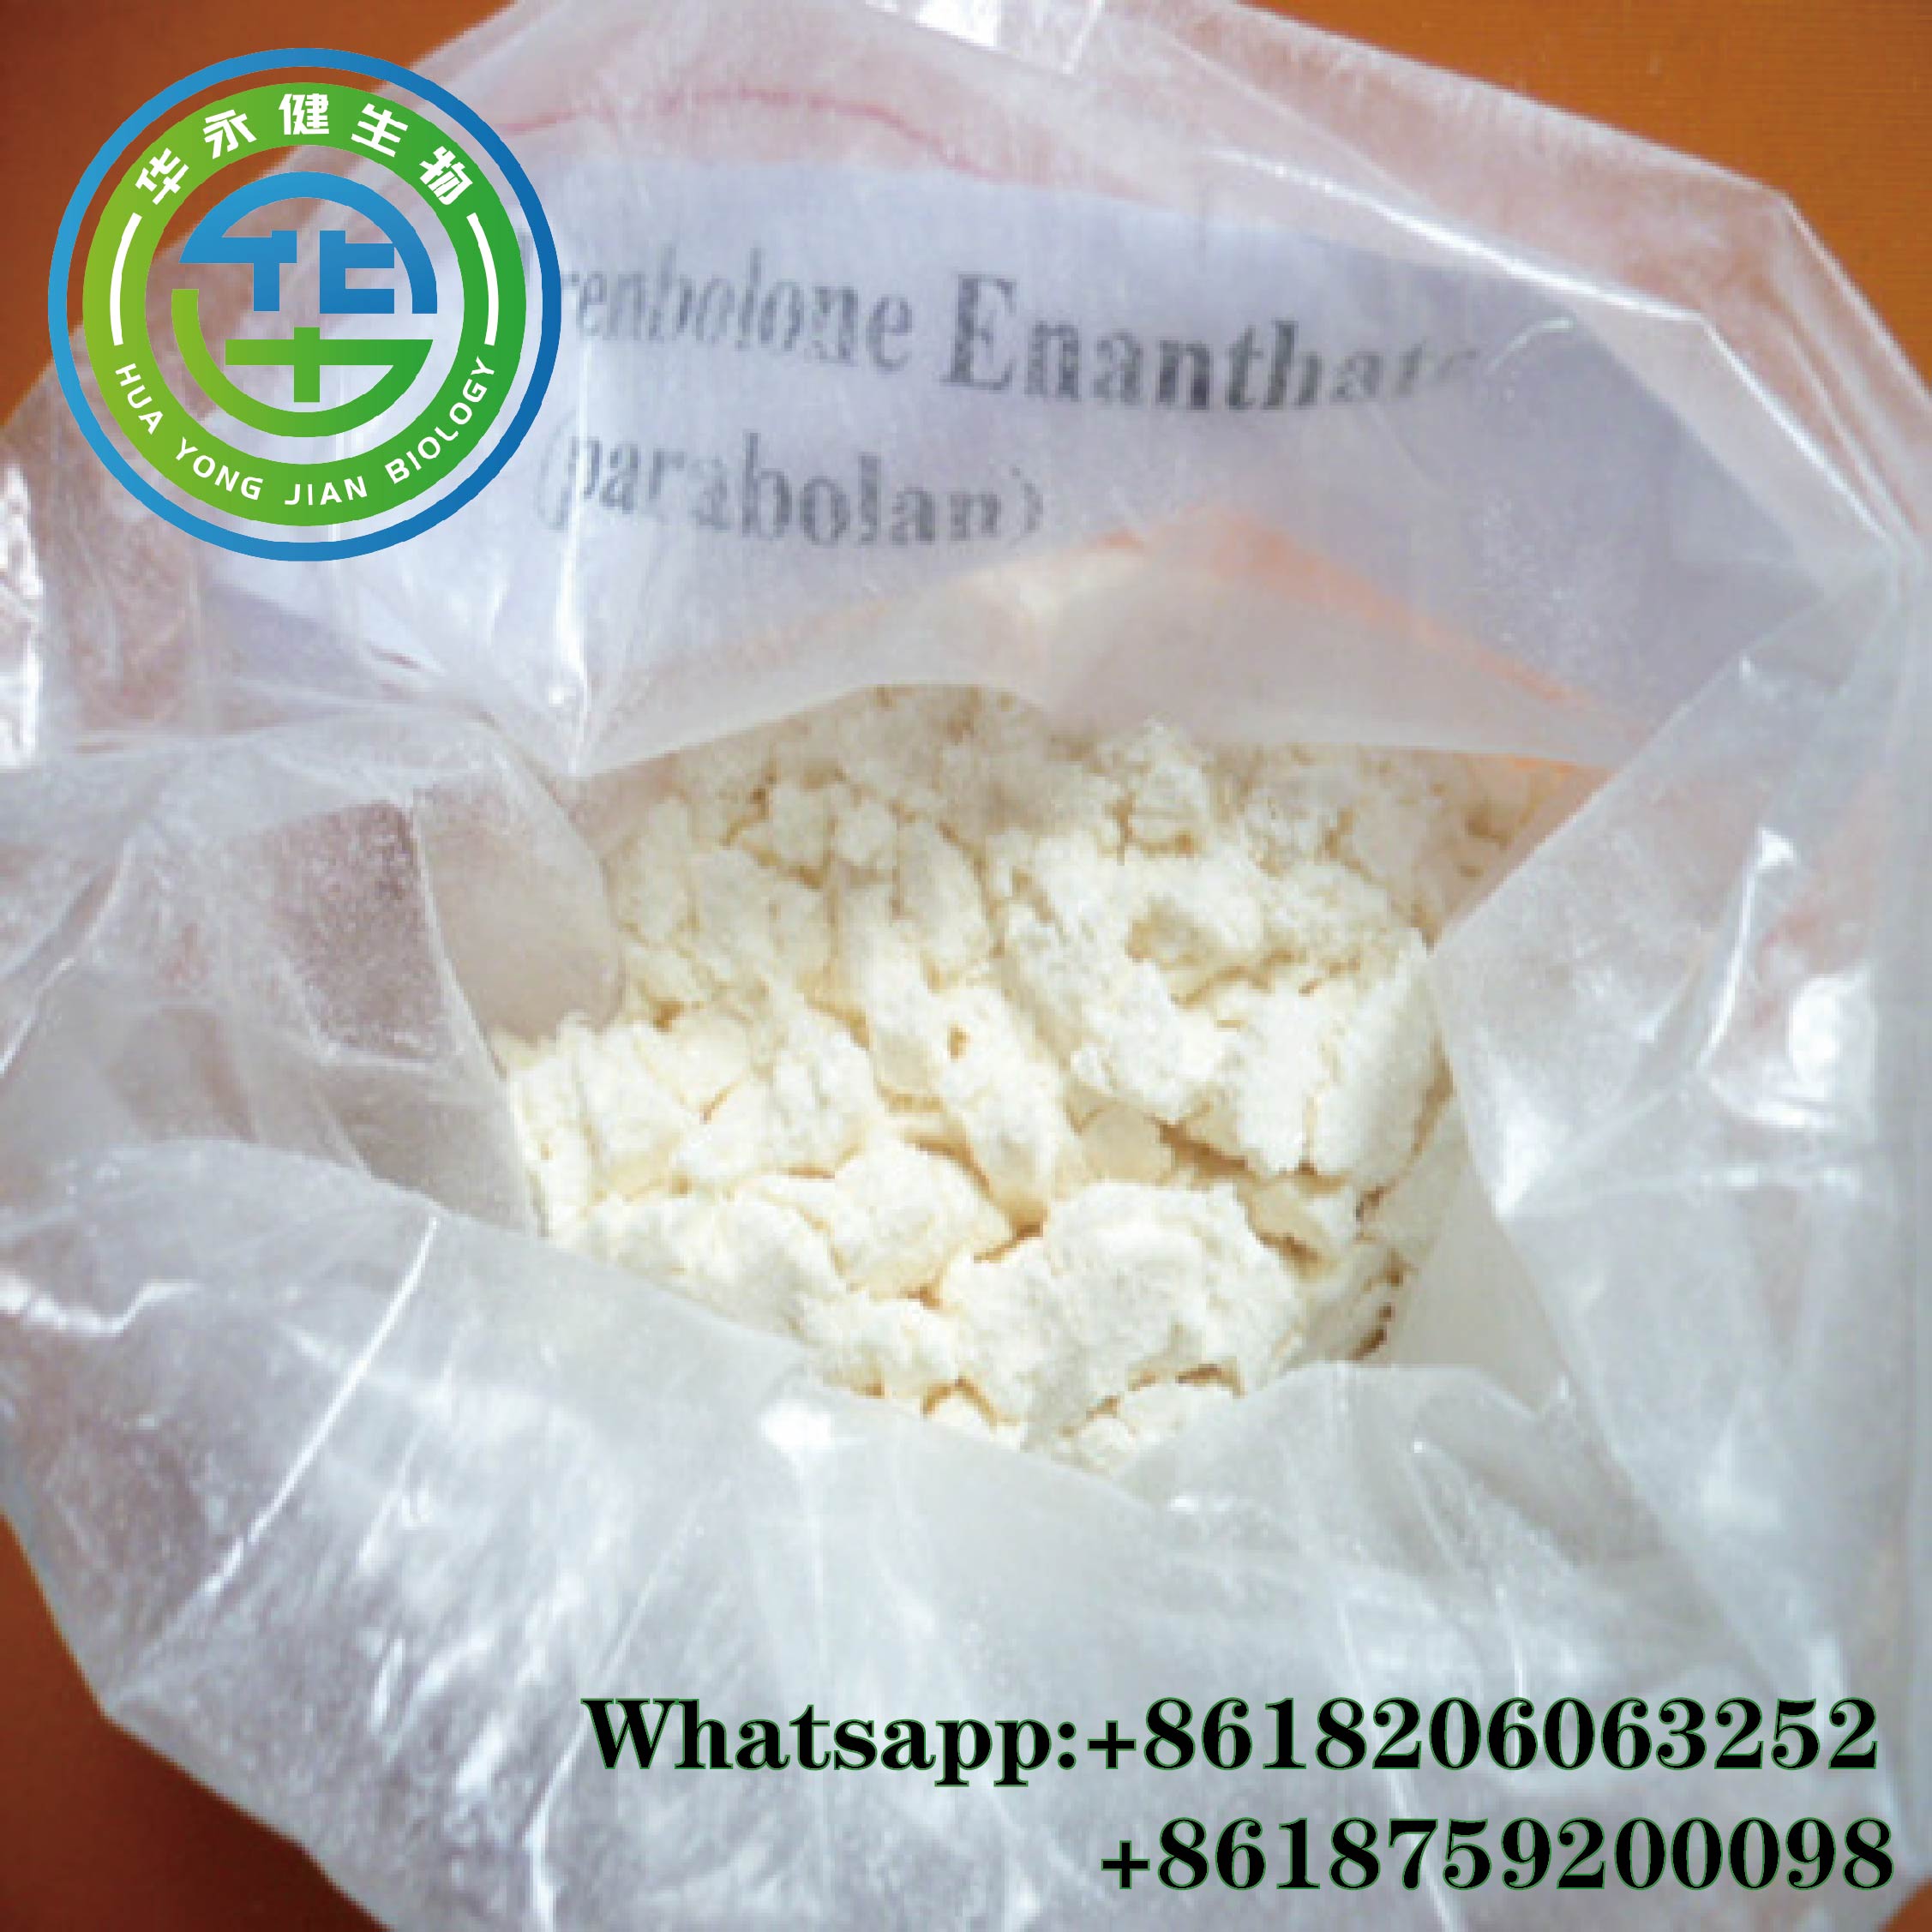 Human Growth Trenbolone Enanthate Powder Parabolan 99.68% Purity Most Powerful Tren Enanthate Anabolic Steroid Powder 